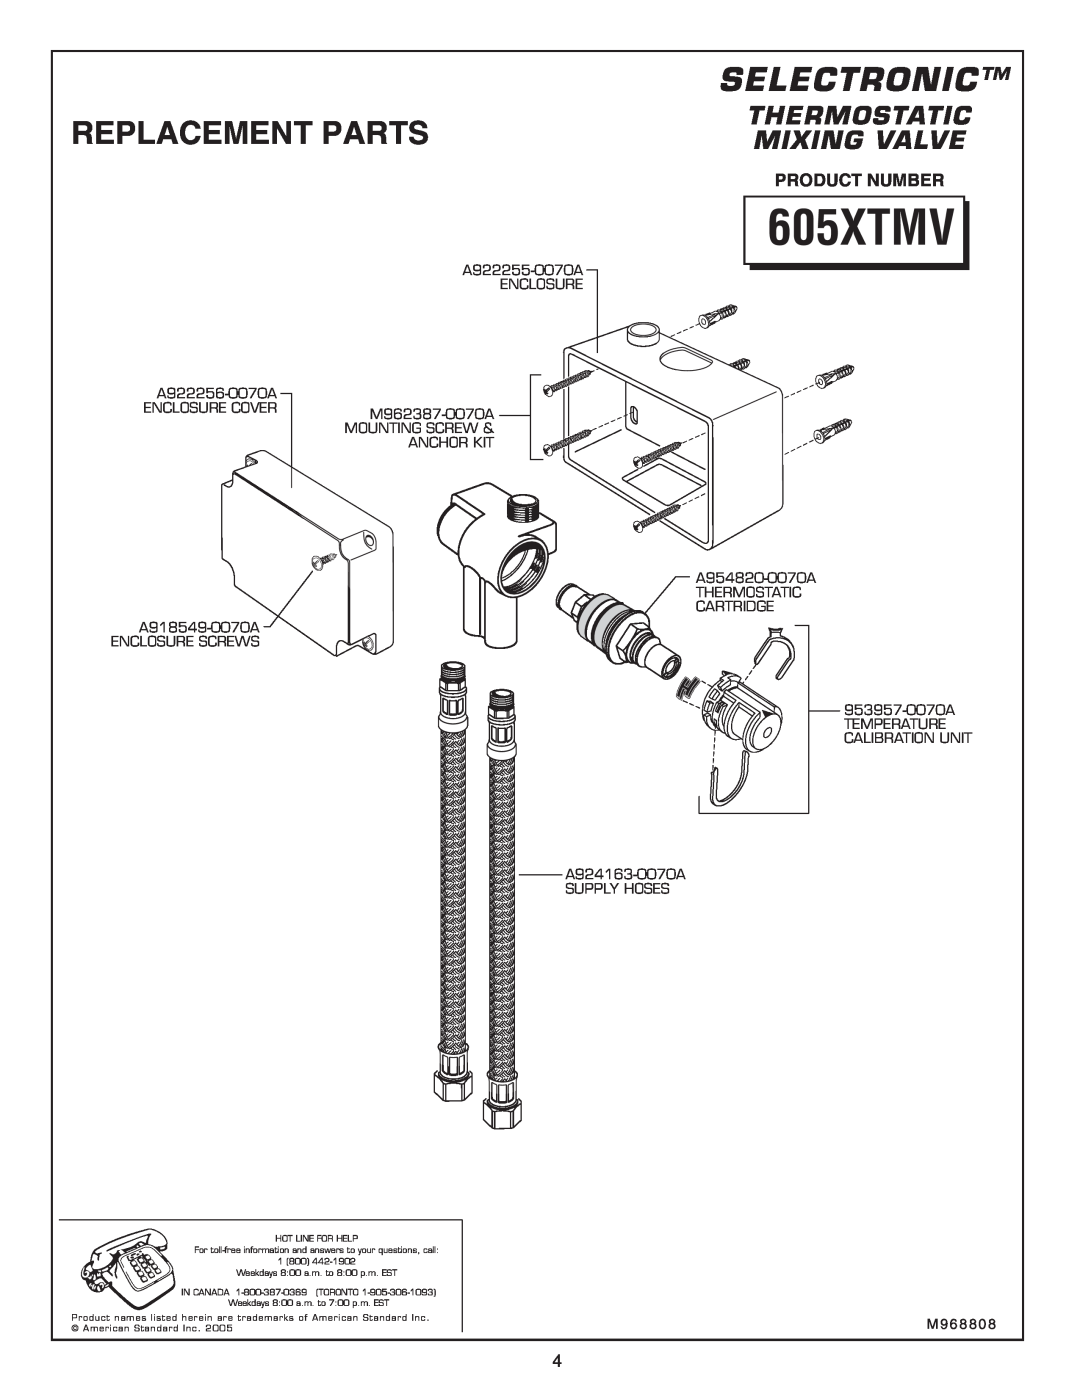 American Standard 605XTMV installation instructions Replacement Parts, Selectronic, Thermostatic Mixing Valve 